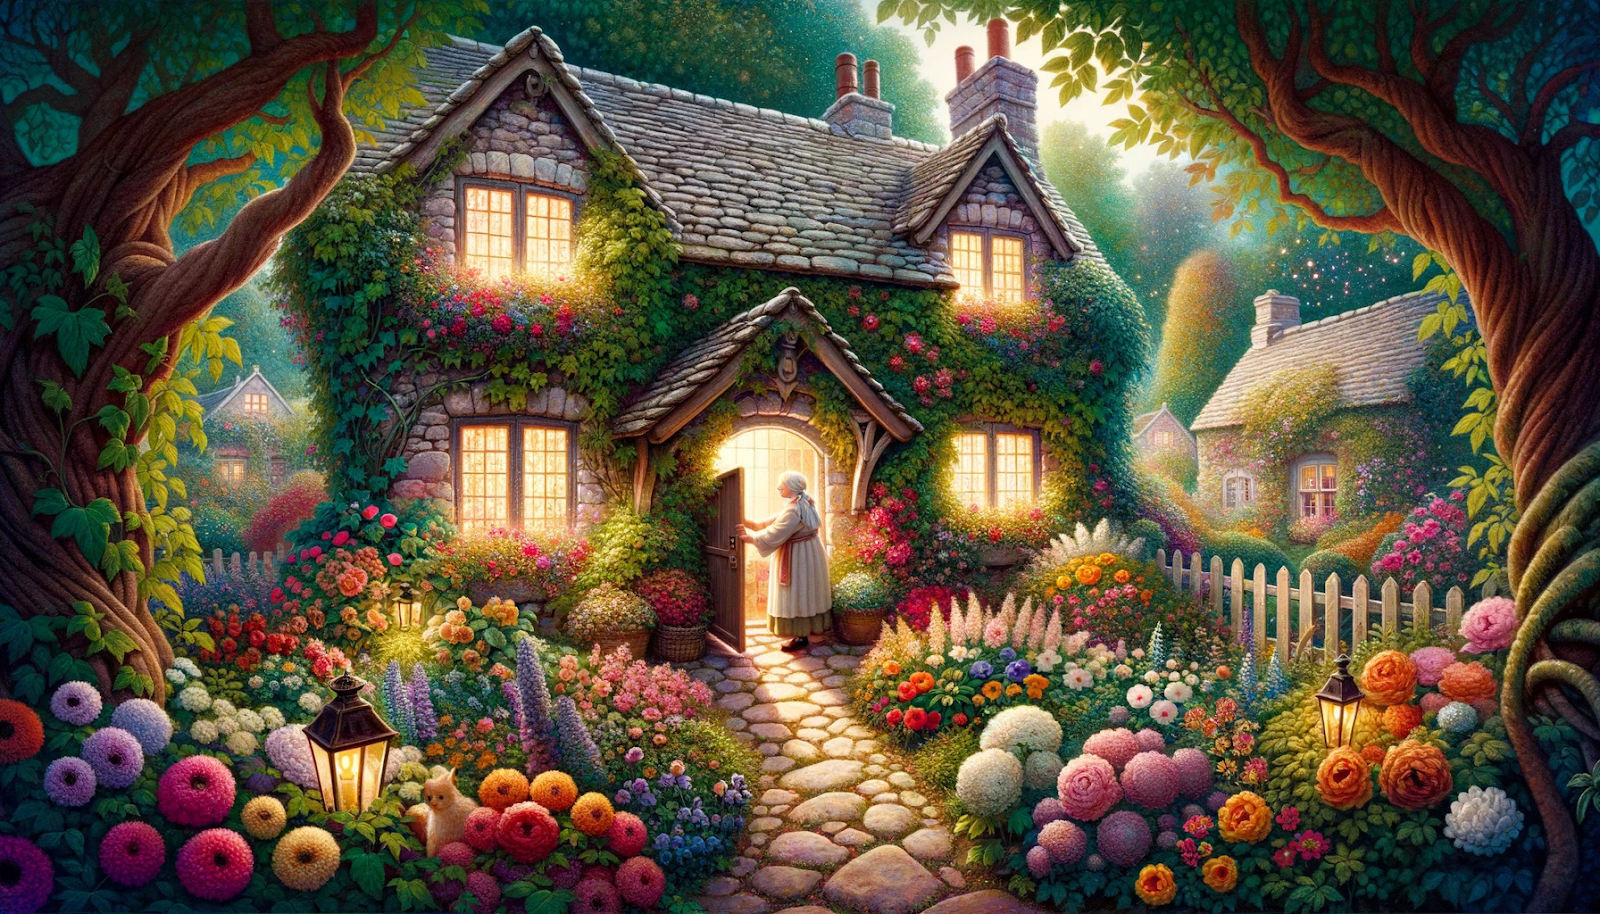 Illustration of a cozy, old-fashioned cottage surrounded by a vibrant garden filled with flowers of every hue. Ivy tendrils wrap around the stone walls, and the soft light from inside spills out. The door stands ajar, and Mrs. Everly, an elderly woman with wise eyes and a gentle demeanor, greets Seraphine and Leo. The garden path is illuminated by lanterns casting a warm glow.